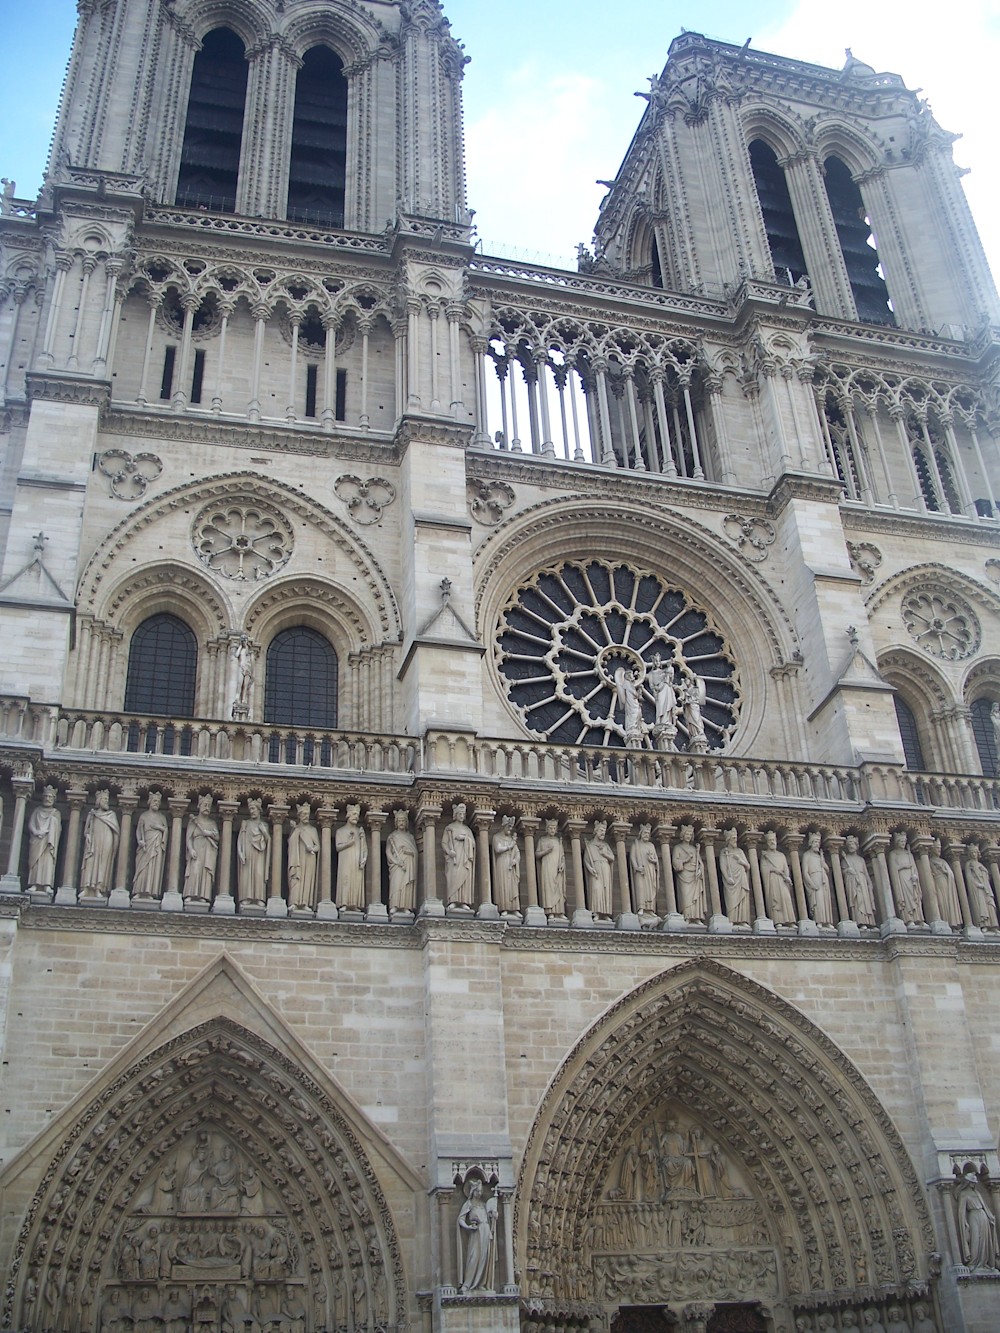 The front of the Cathedral of Notre Dame in Paris, France